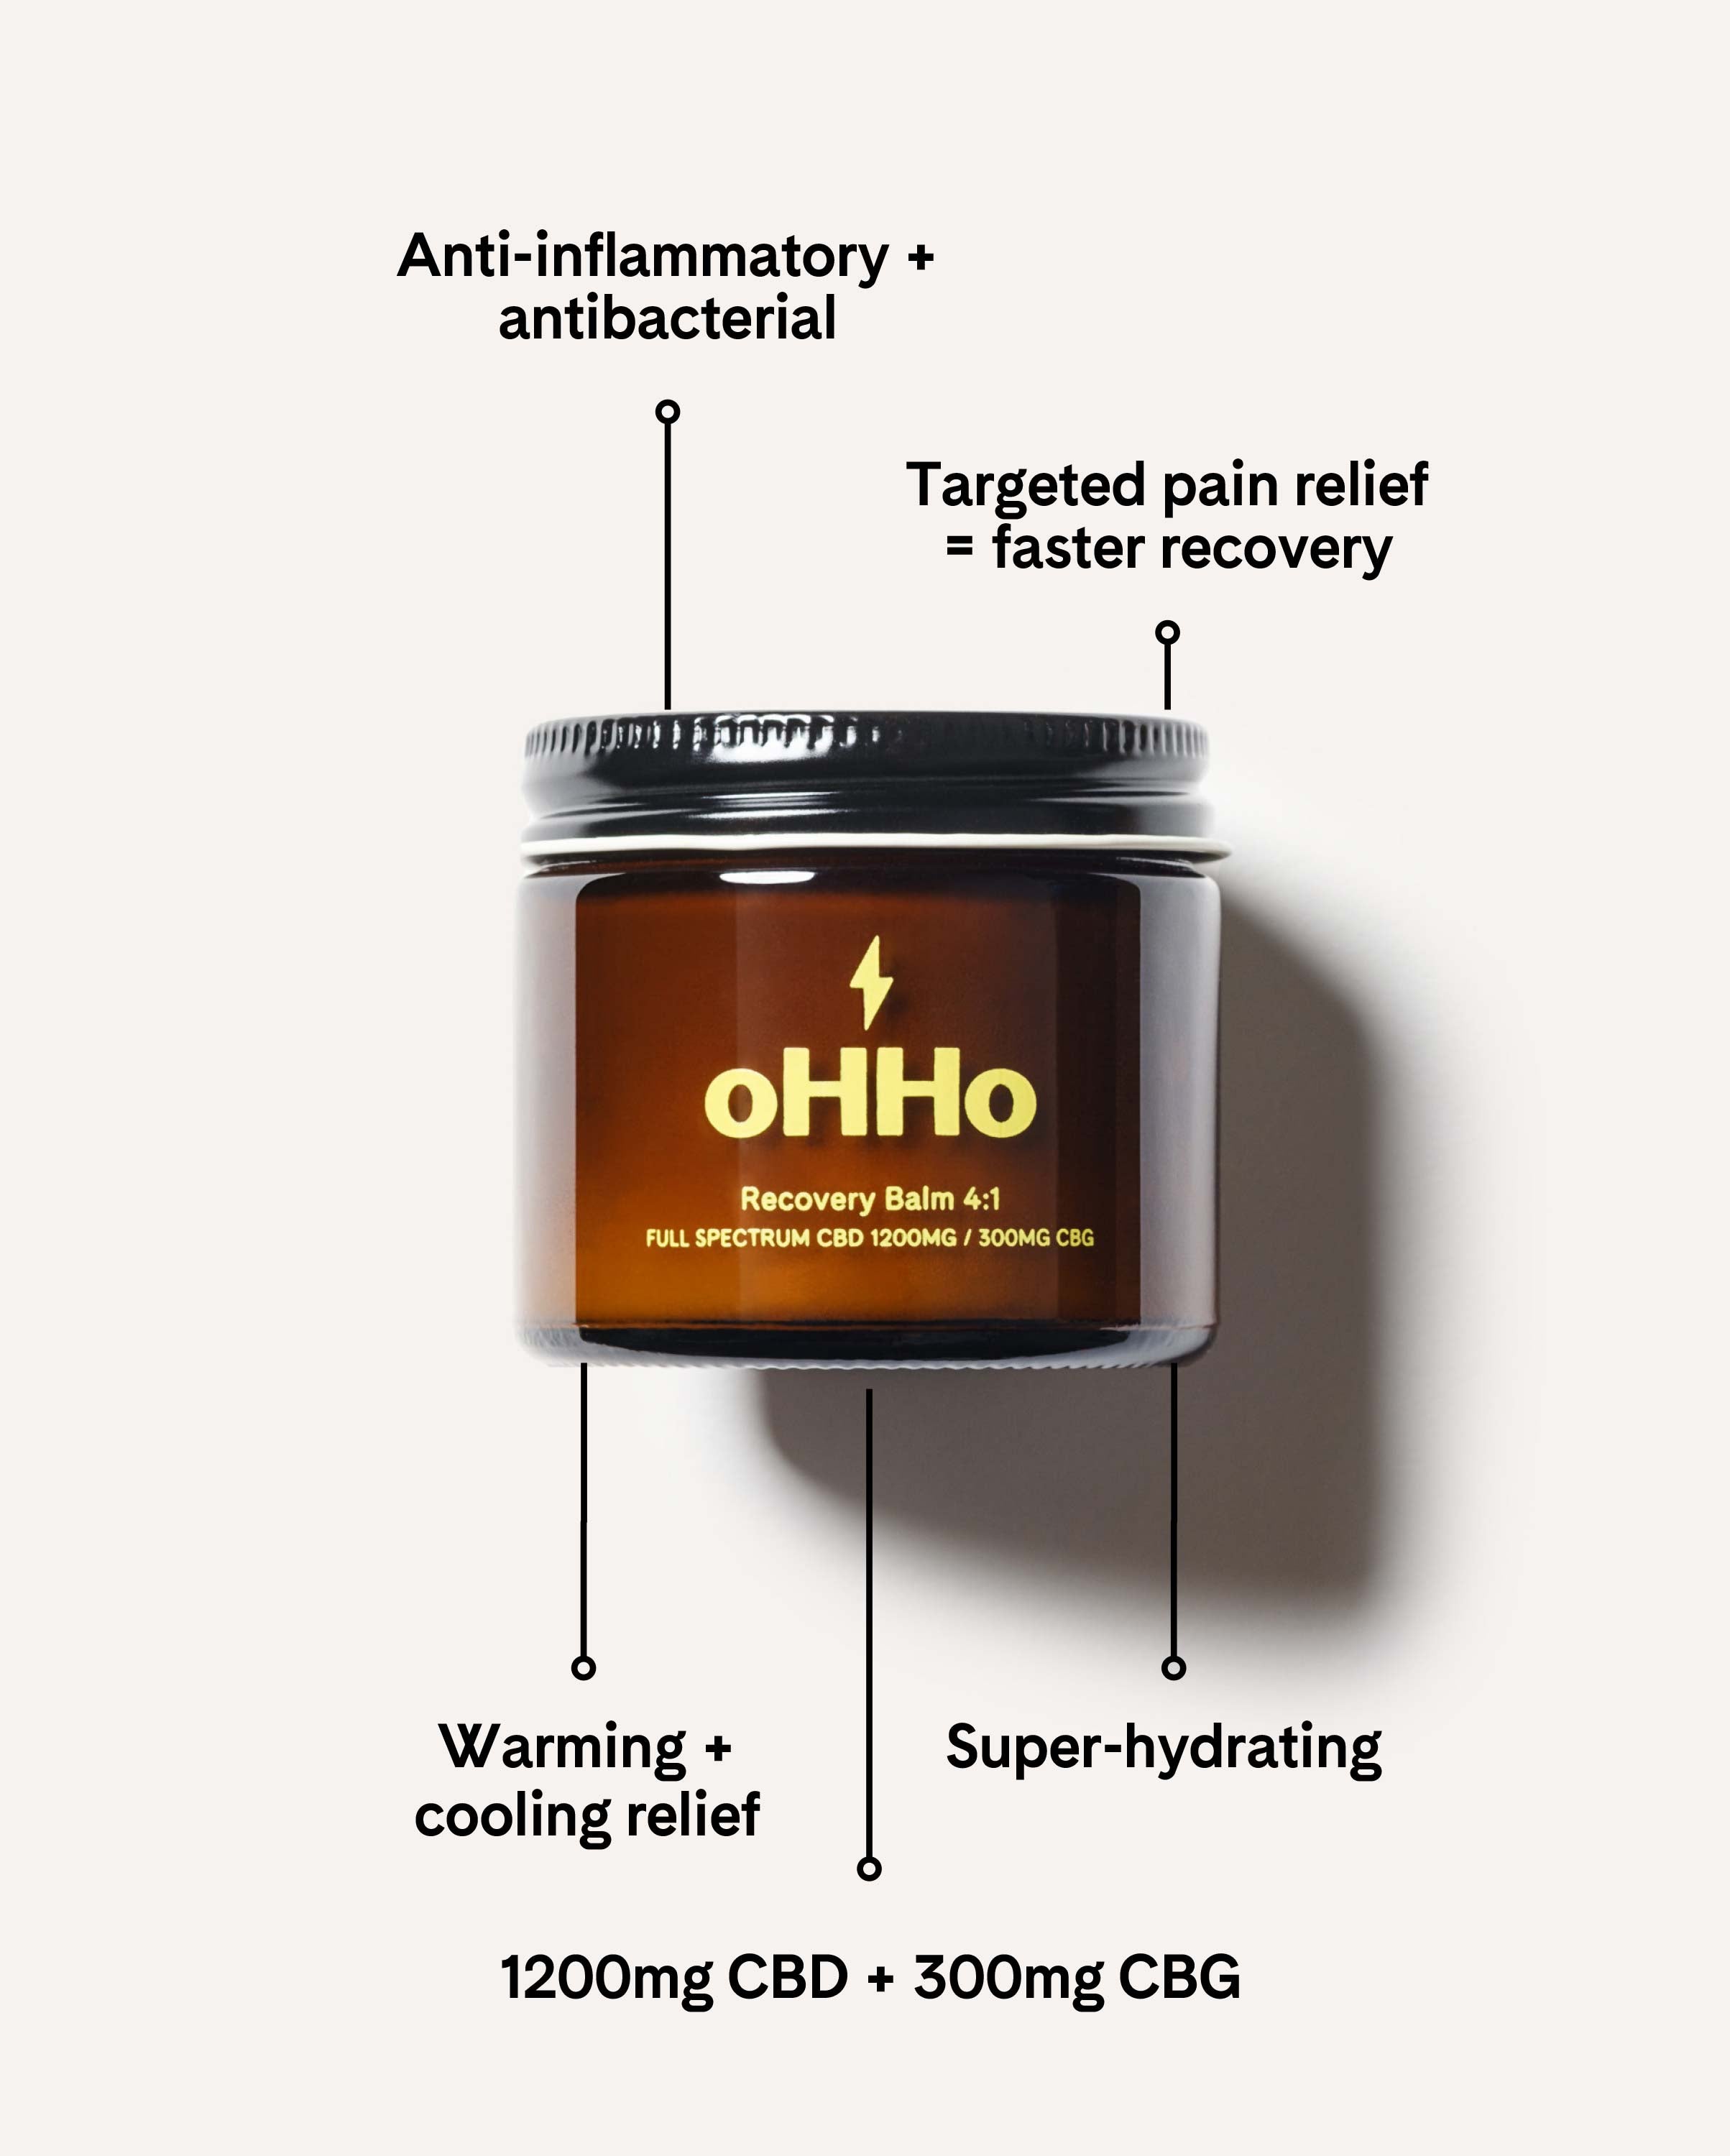 Recovery balm jar with descriptive text